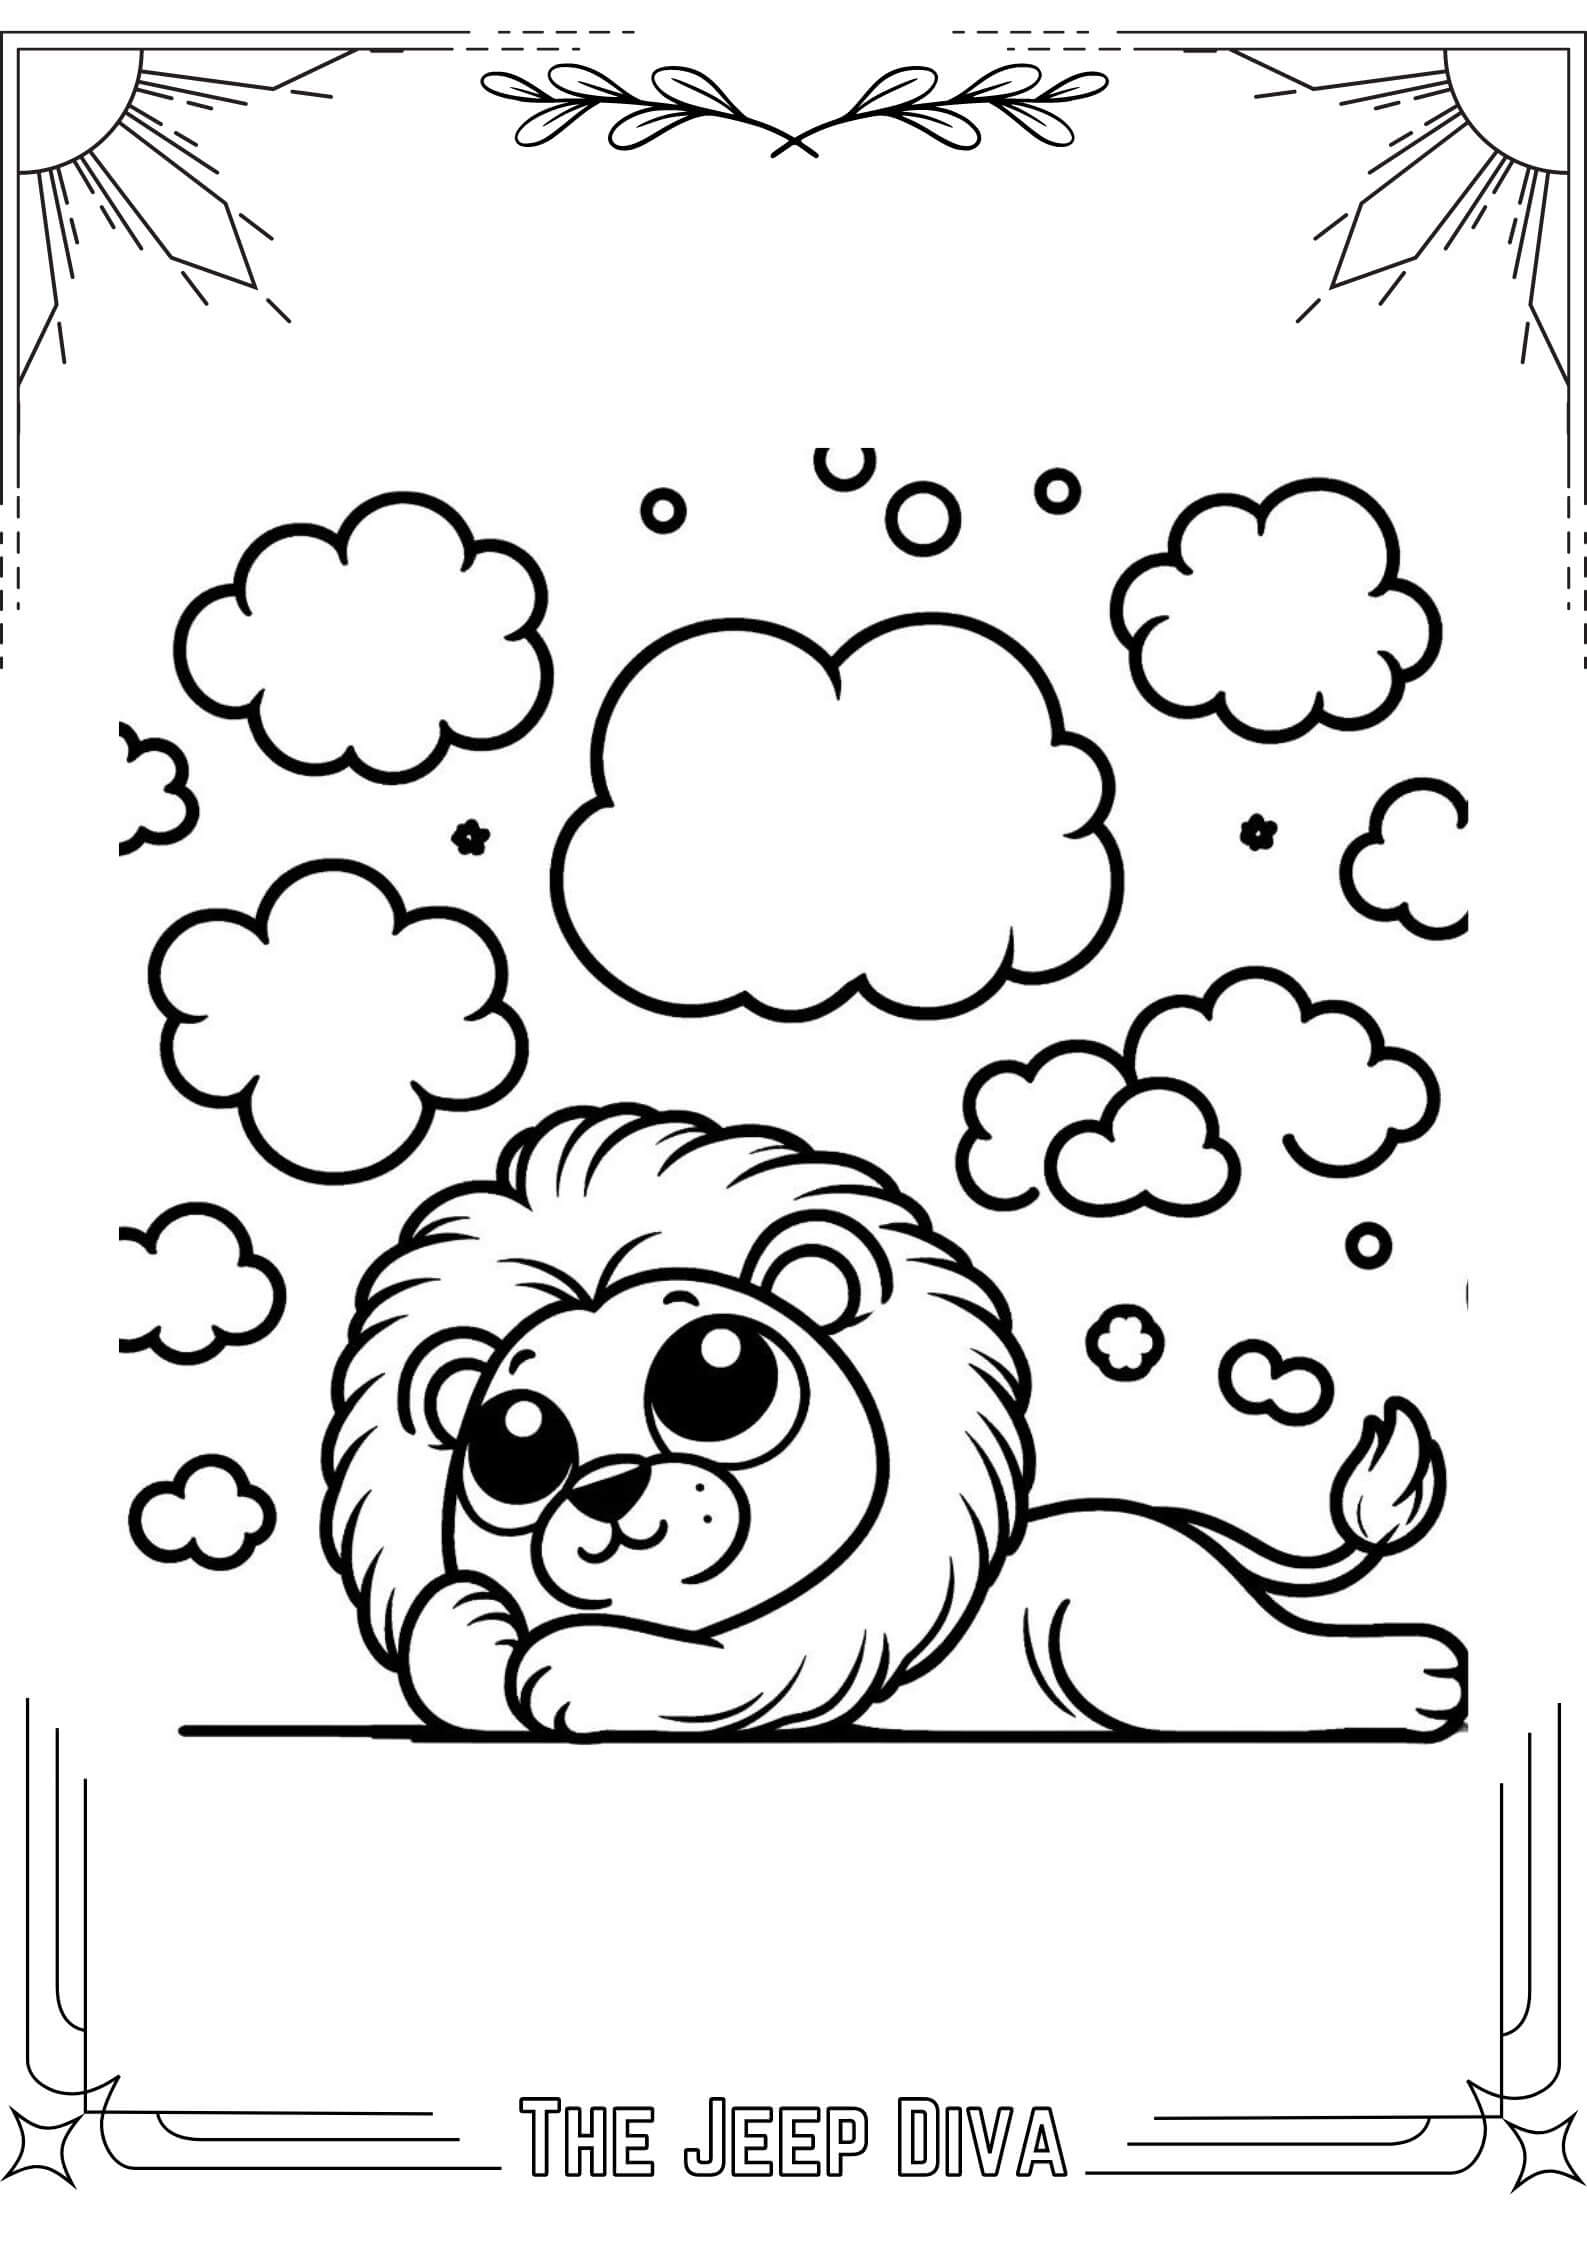 The Jeep Diva Coloring Page Lion Medium Difficulty 23